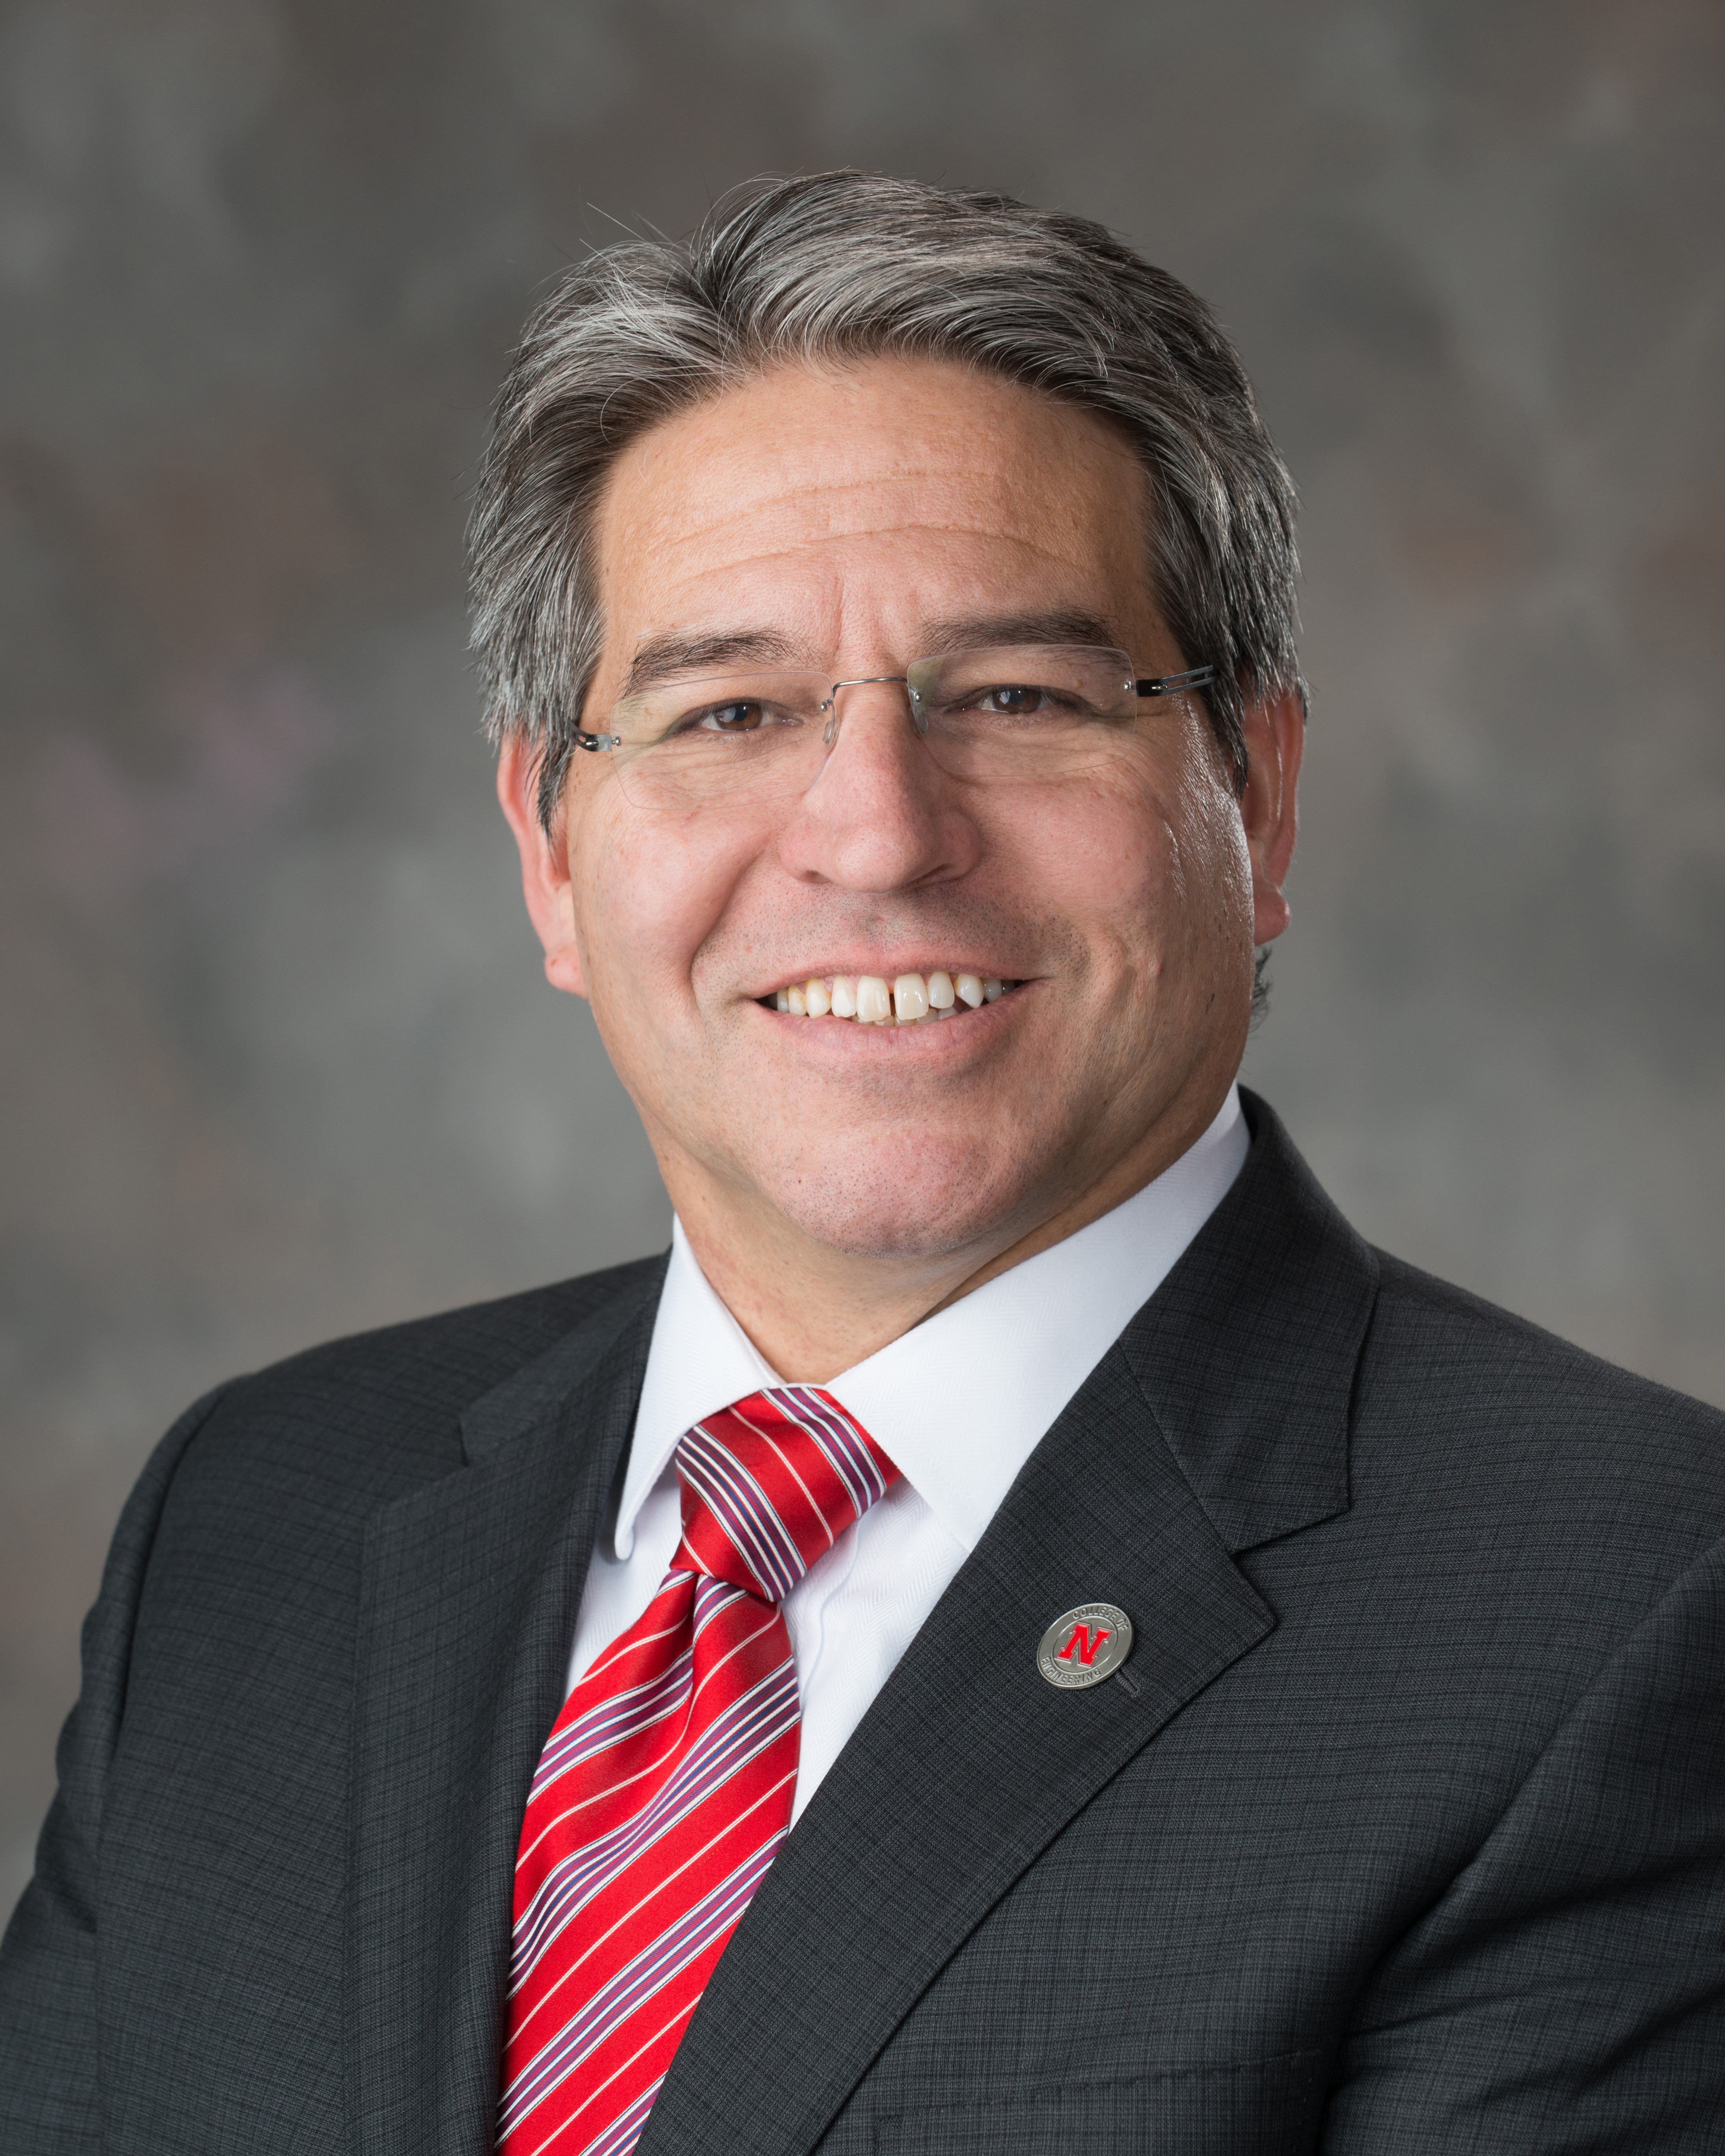 Nebraska Engineering students on Scott Campus are invited to join Dean Lance C. Pérez on Thursday, Oct. 29 at 5:30 p.m. for a virtual Office Hours with the Dean. 